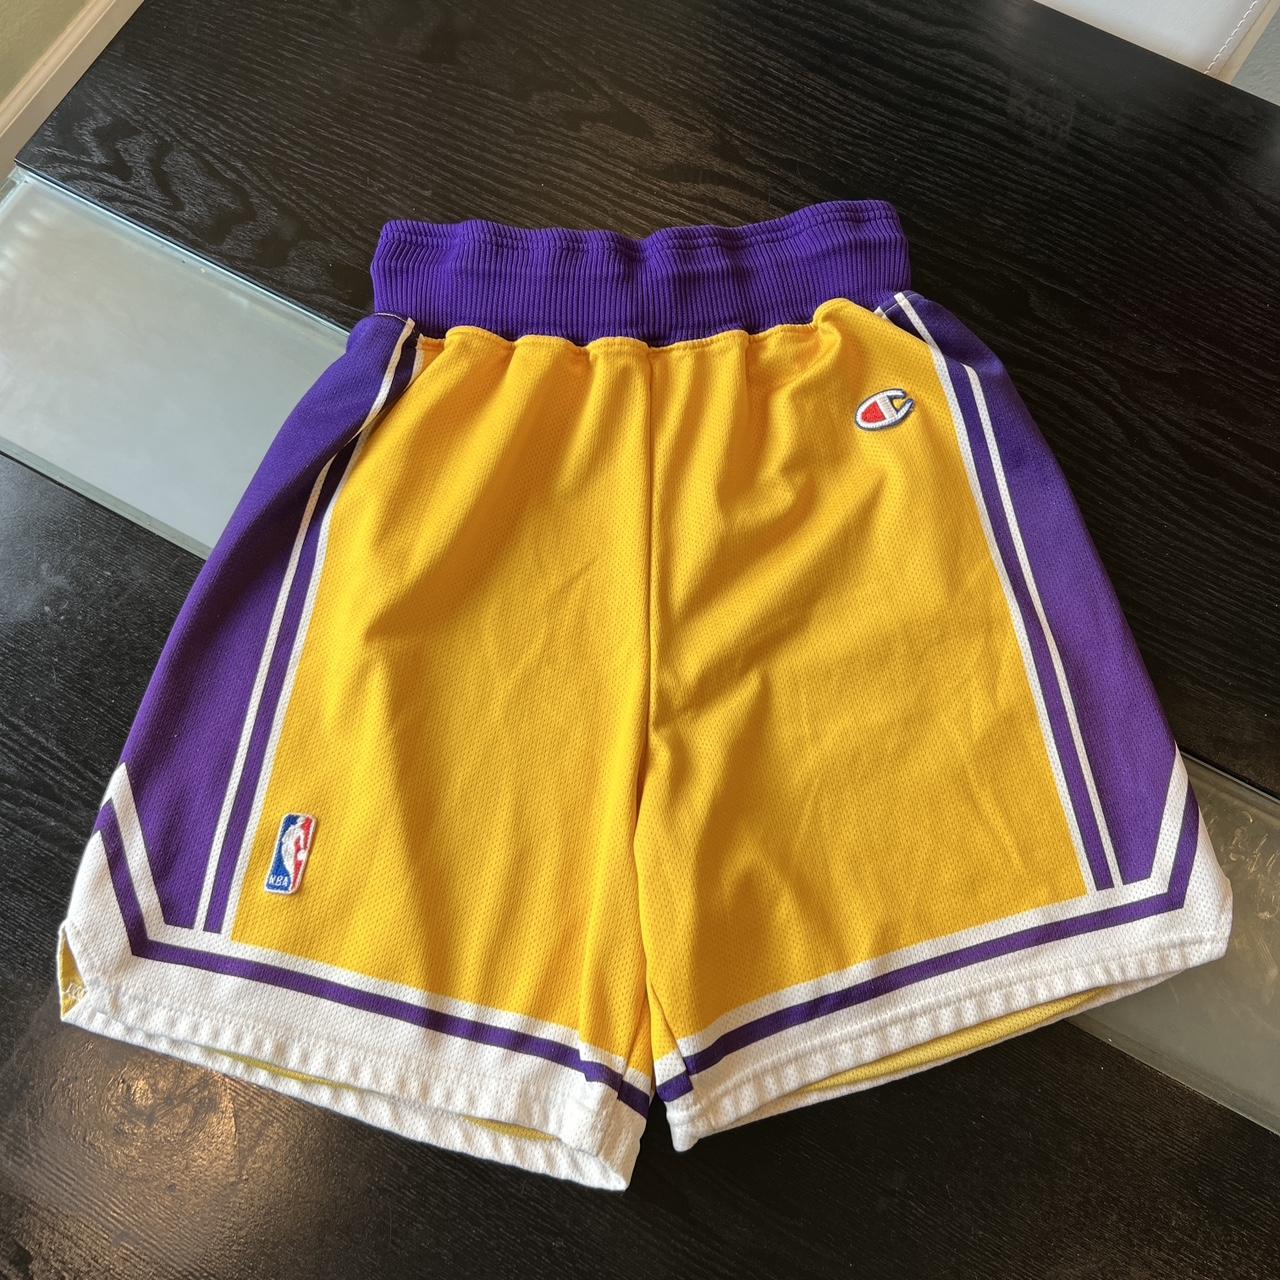 Los Angeles Lakers Vintage Champion Basketball Short Yellow and Black Color  Shorts Men's